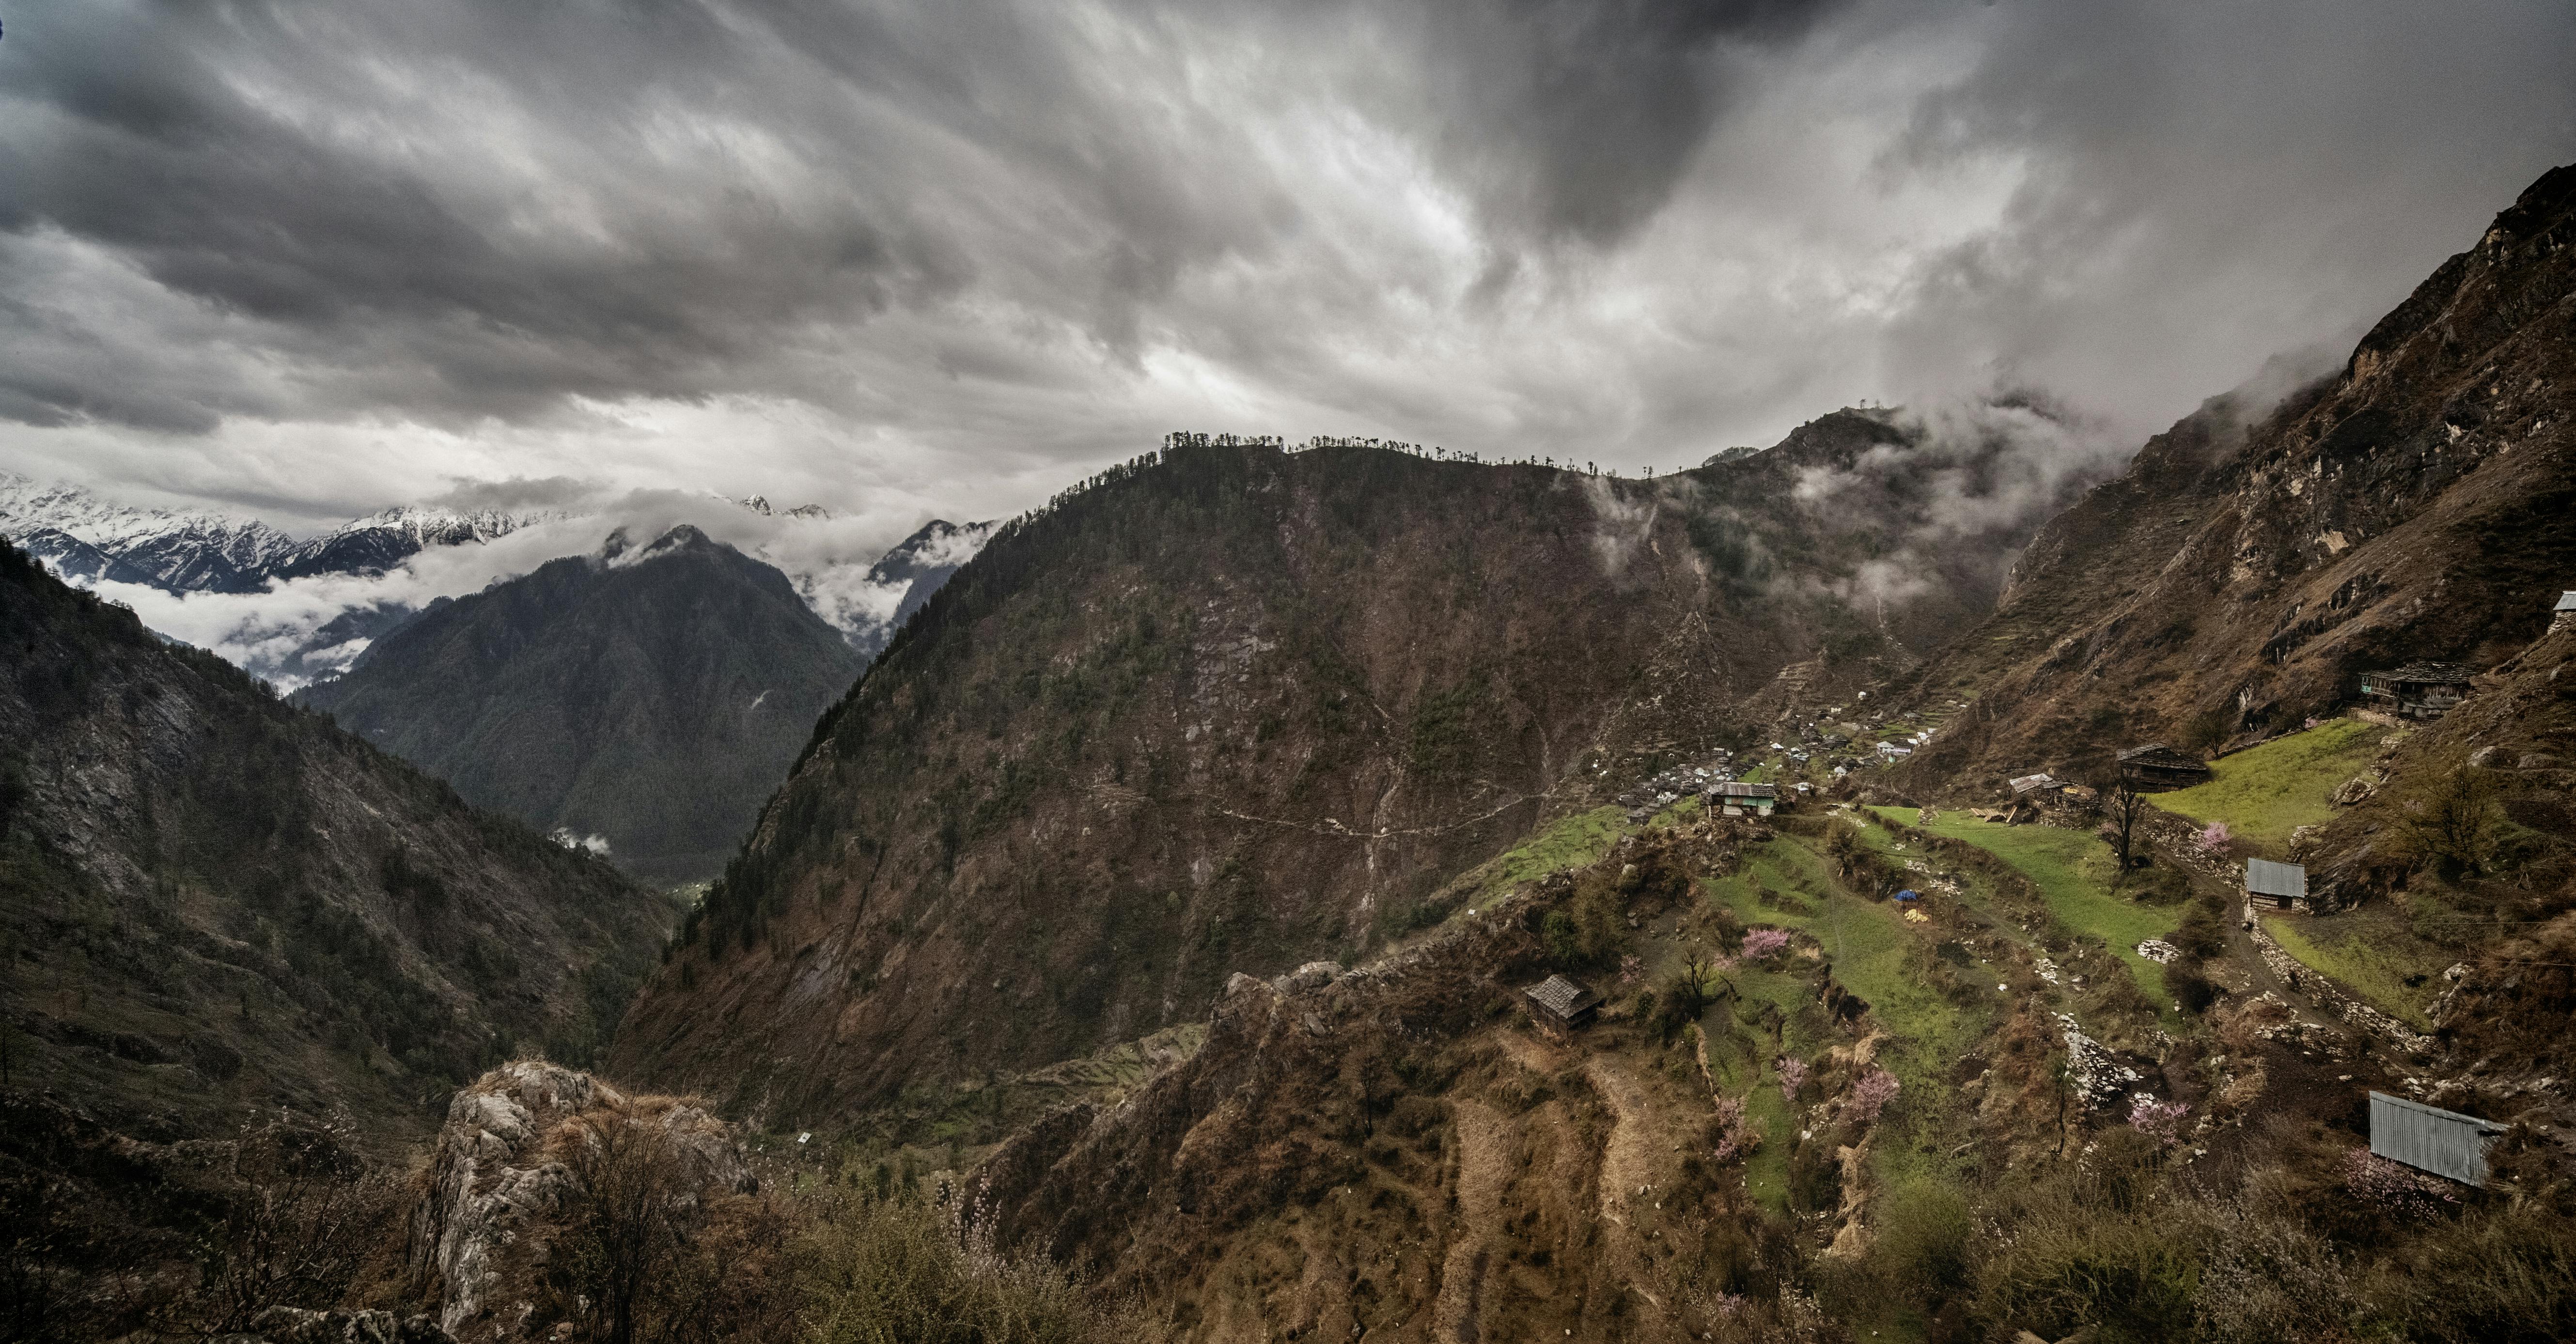 Panoramica senza titolo 1 Deep in the Himalayas, a village tries to grow amidst ban